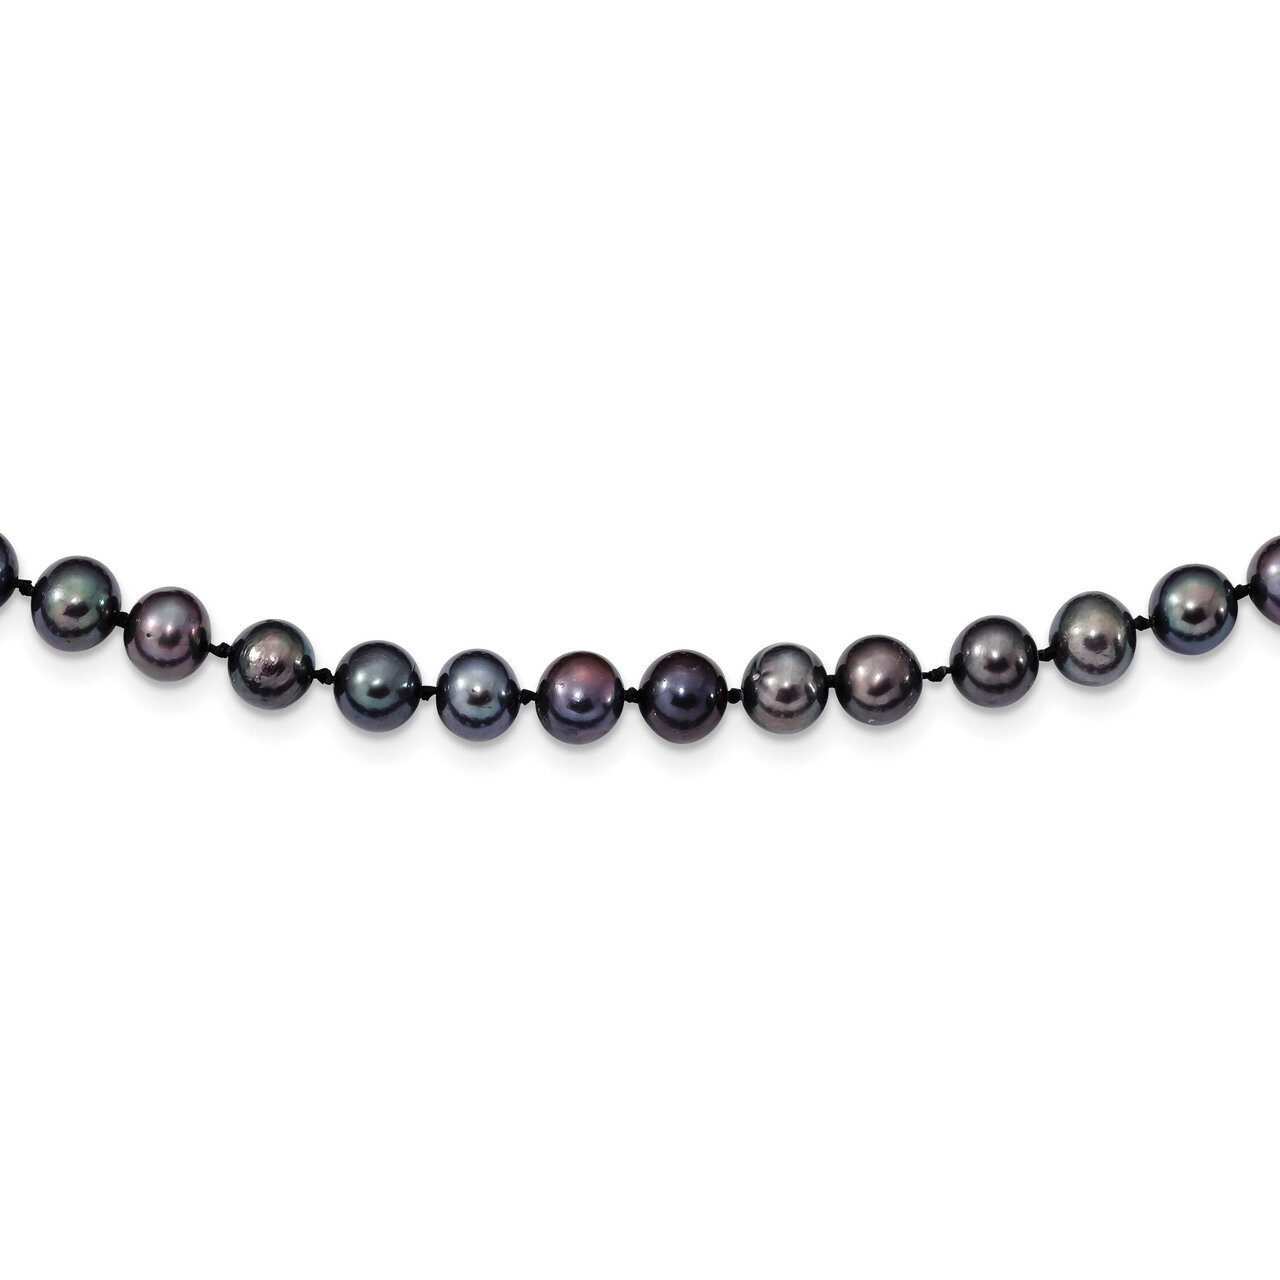 6-7mm Black Cultured Freshwater Pearl Necklace 24 Inch Sterling Silver Rhodium-plated QH5154-24